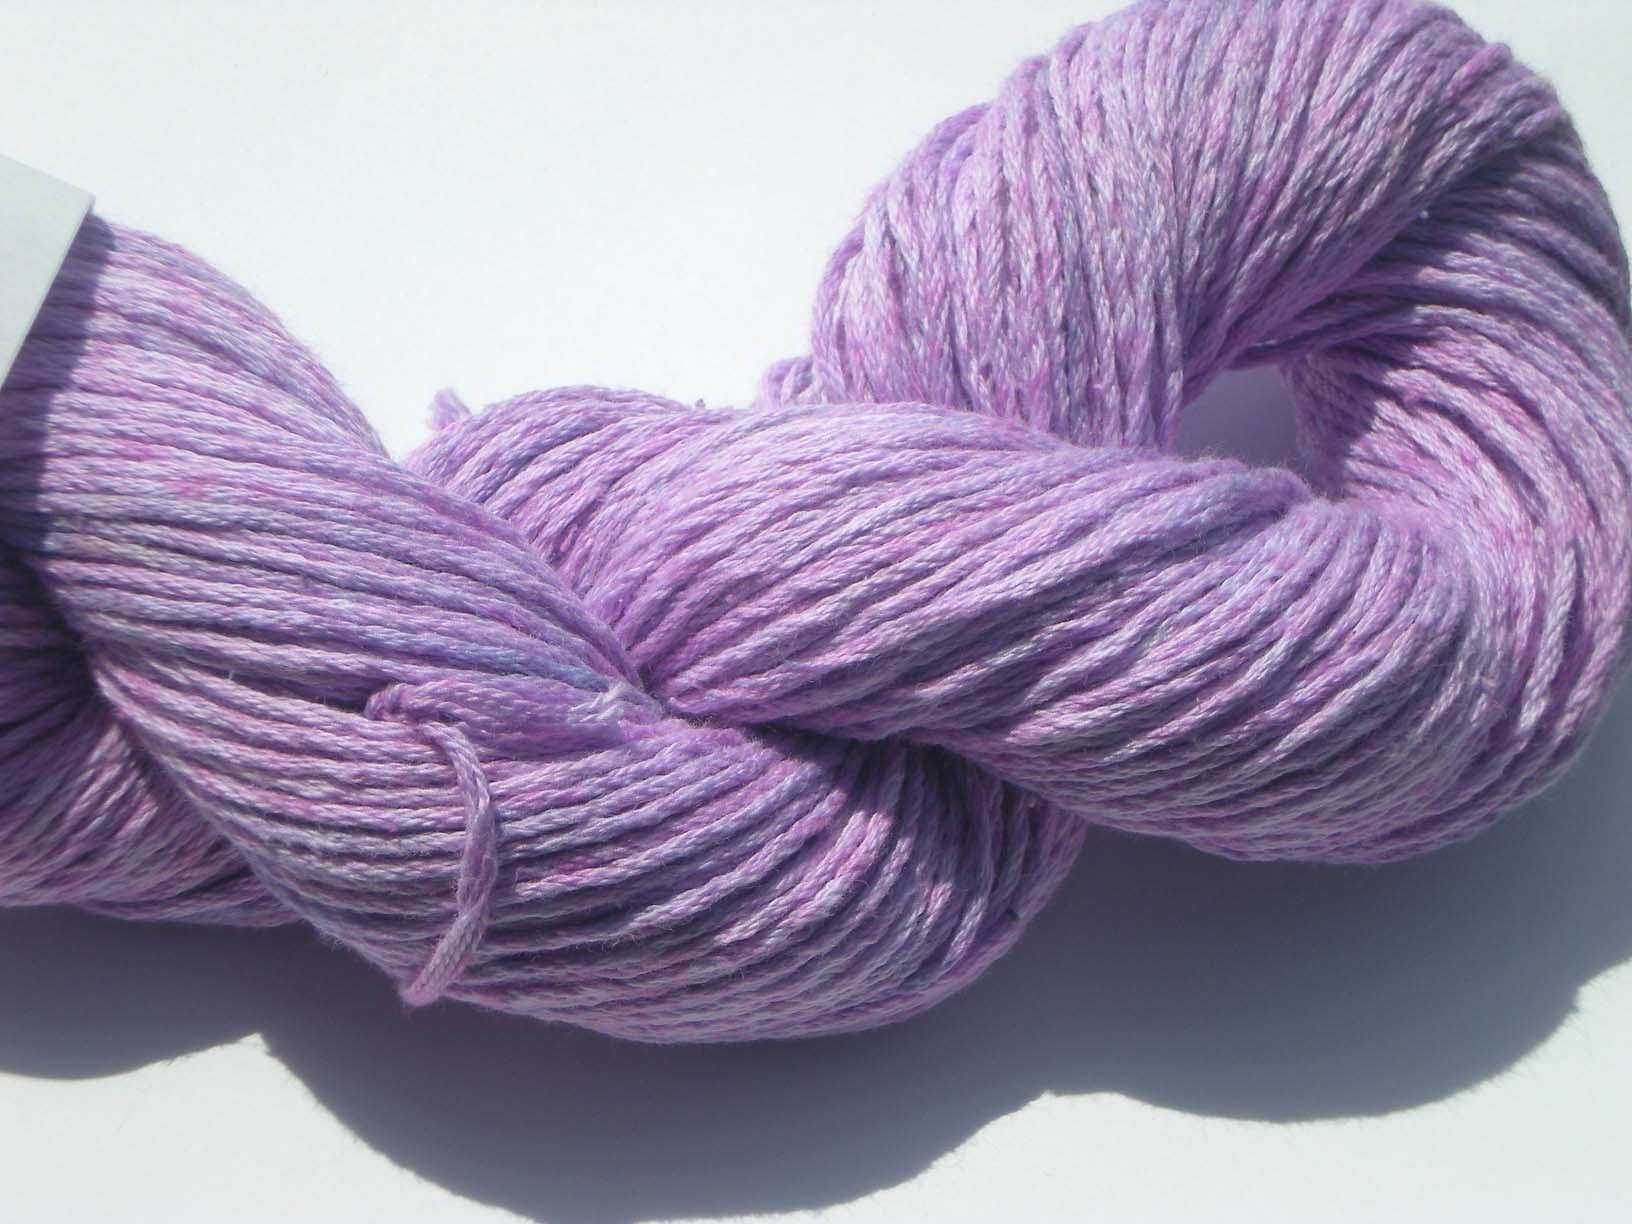 Hand Dyed, Recycled, Respun Cotton Yarn, Sport Weight, 182 Yards No. 112